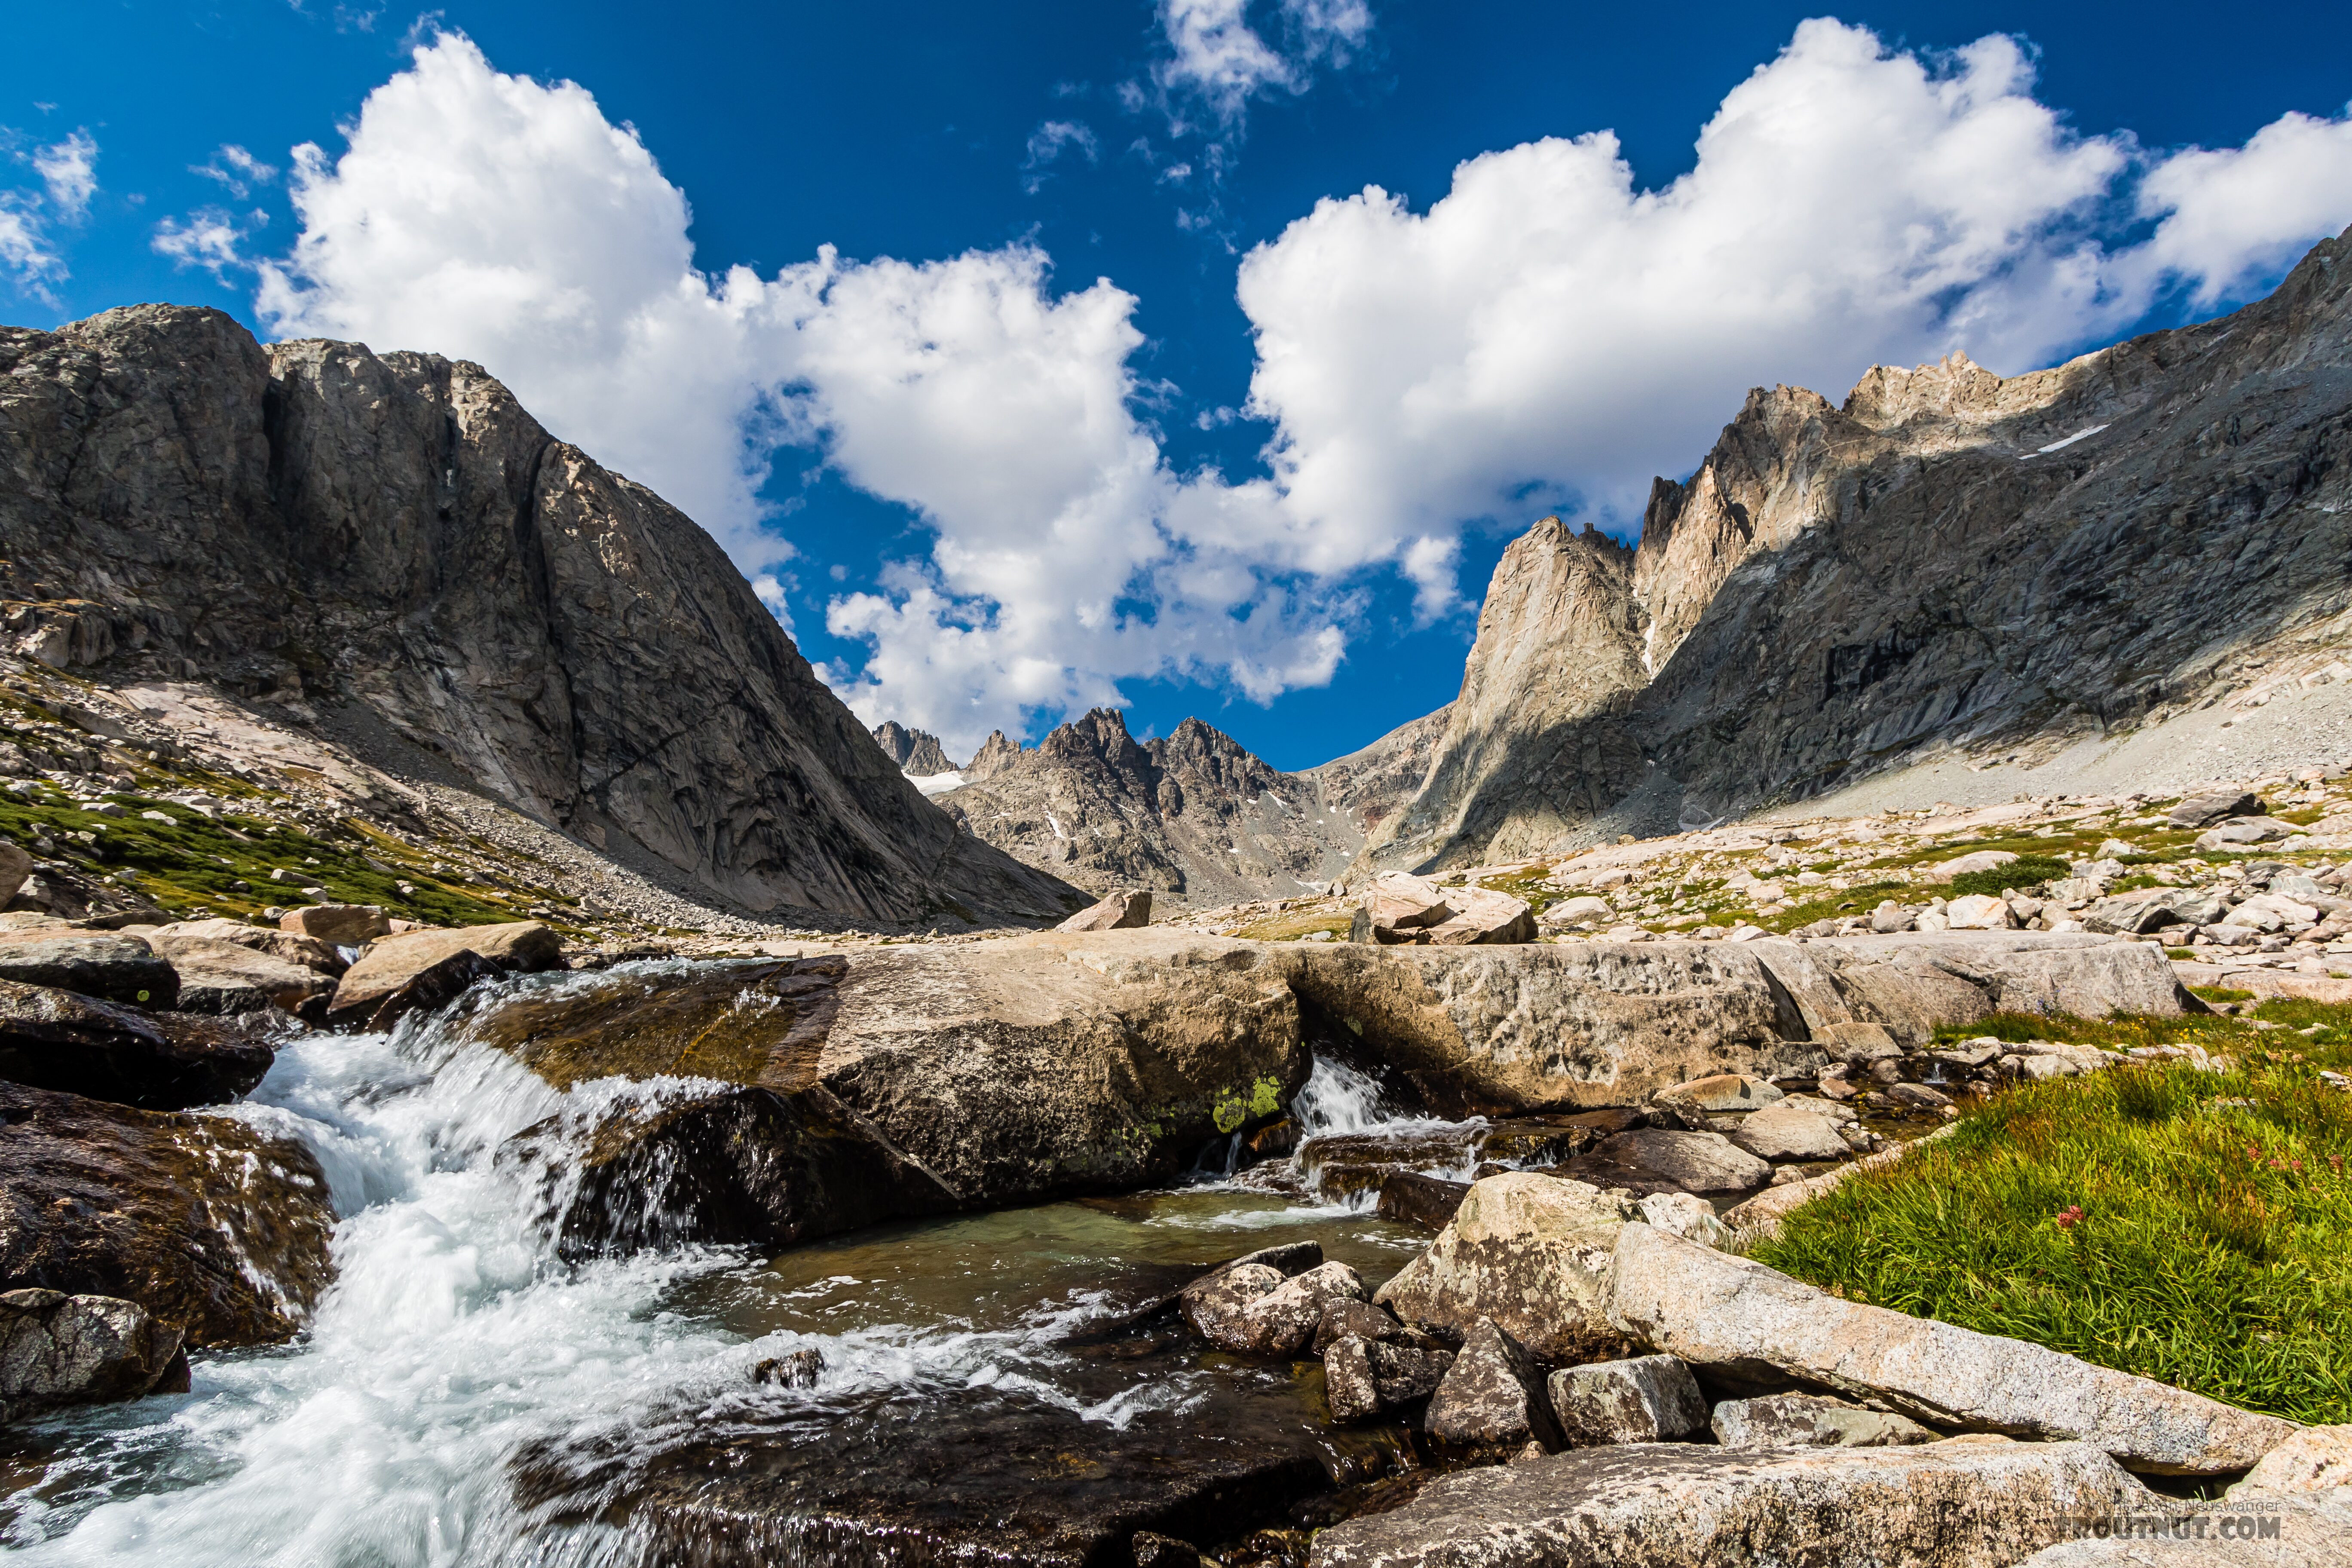  From Titcomb Basin in Wyoming.